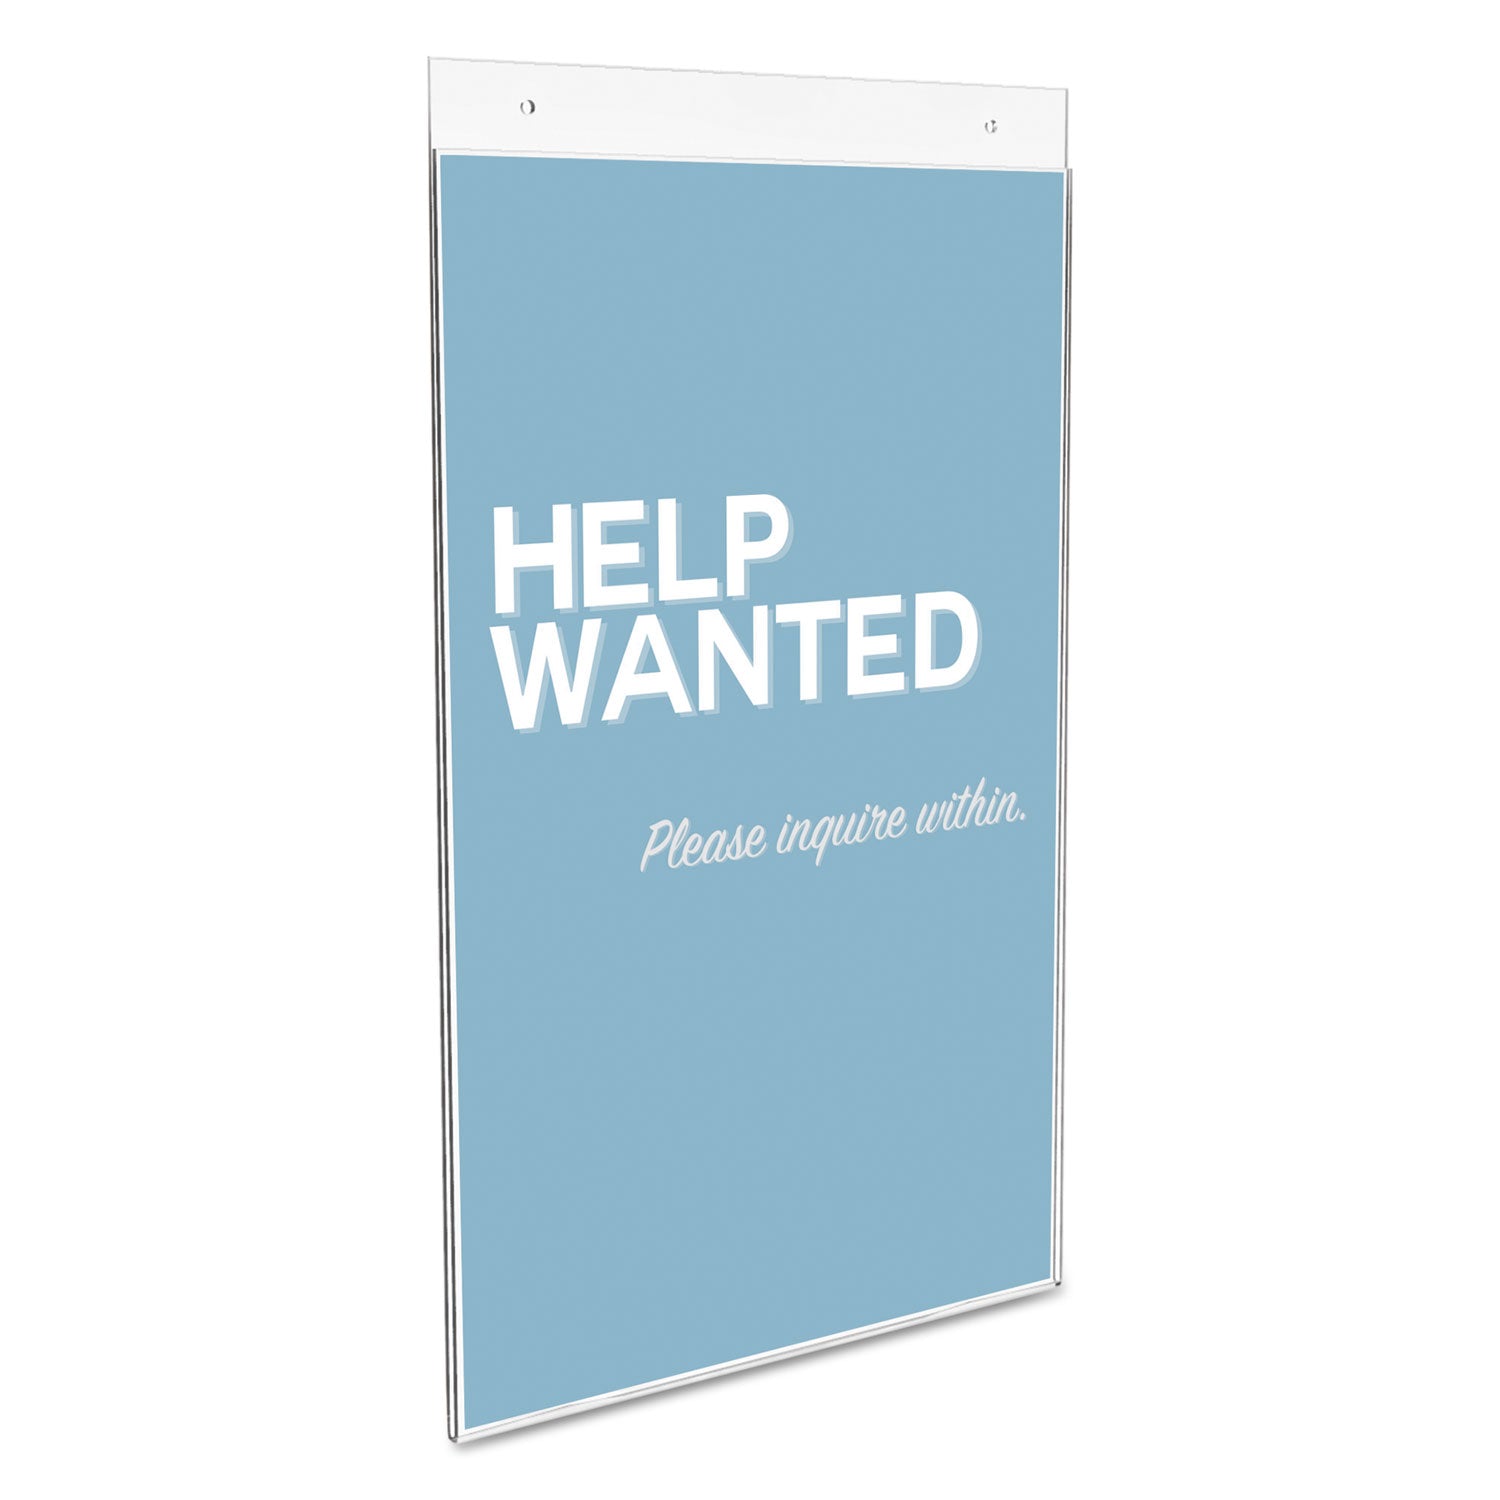 classic-image-single-sided-wall-sign-holder-plastic-11-x-17-insert-clear_def68001 - 3